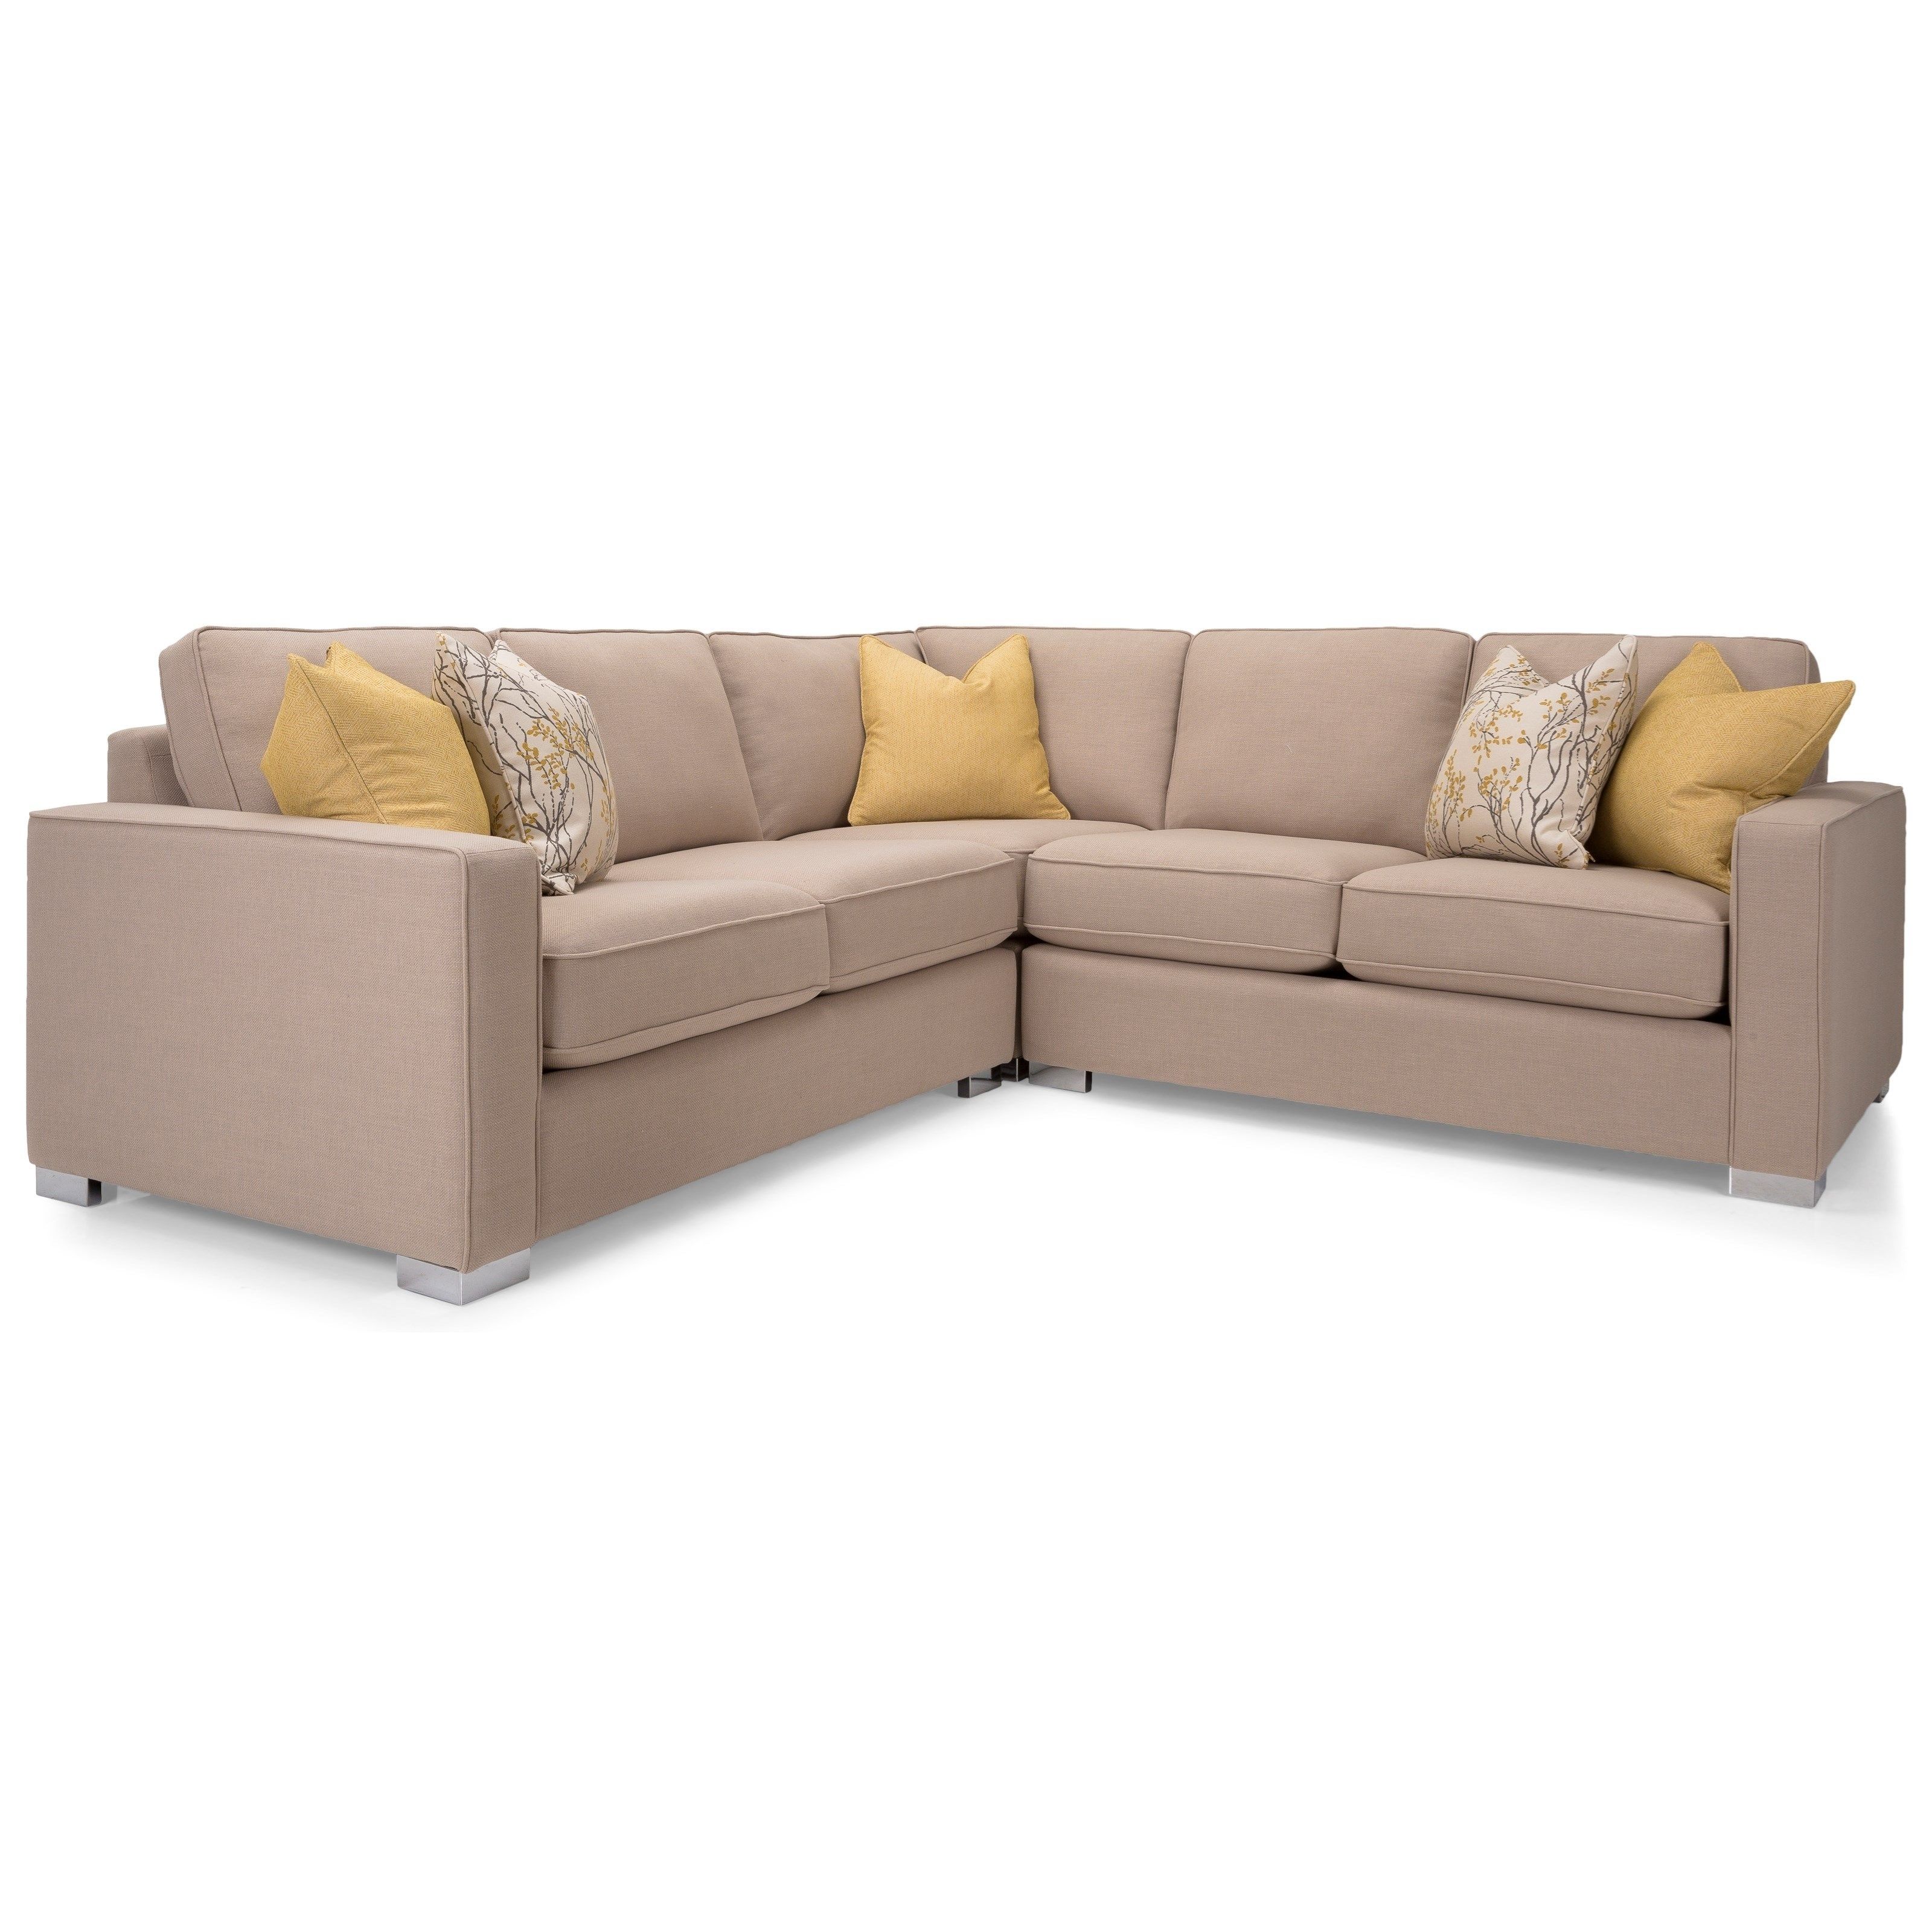 Decor Rest 7743 Three Piece Corner Sectional Sofa | Stoney Creek With Regard To Sectional Sofas At Brampton (View 1 of 10)